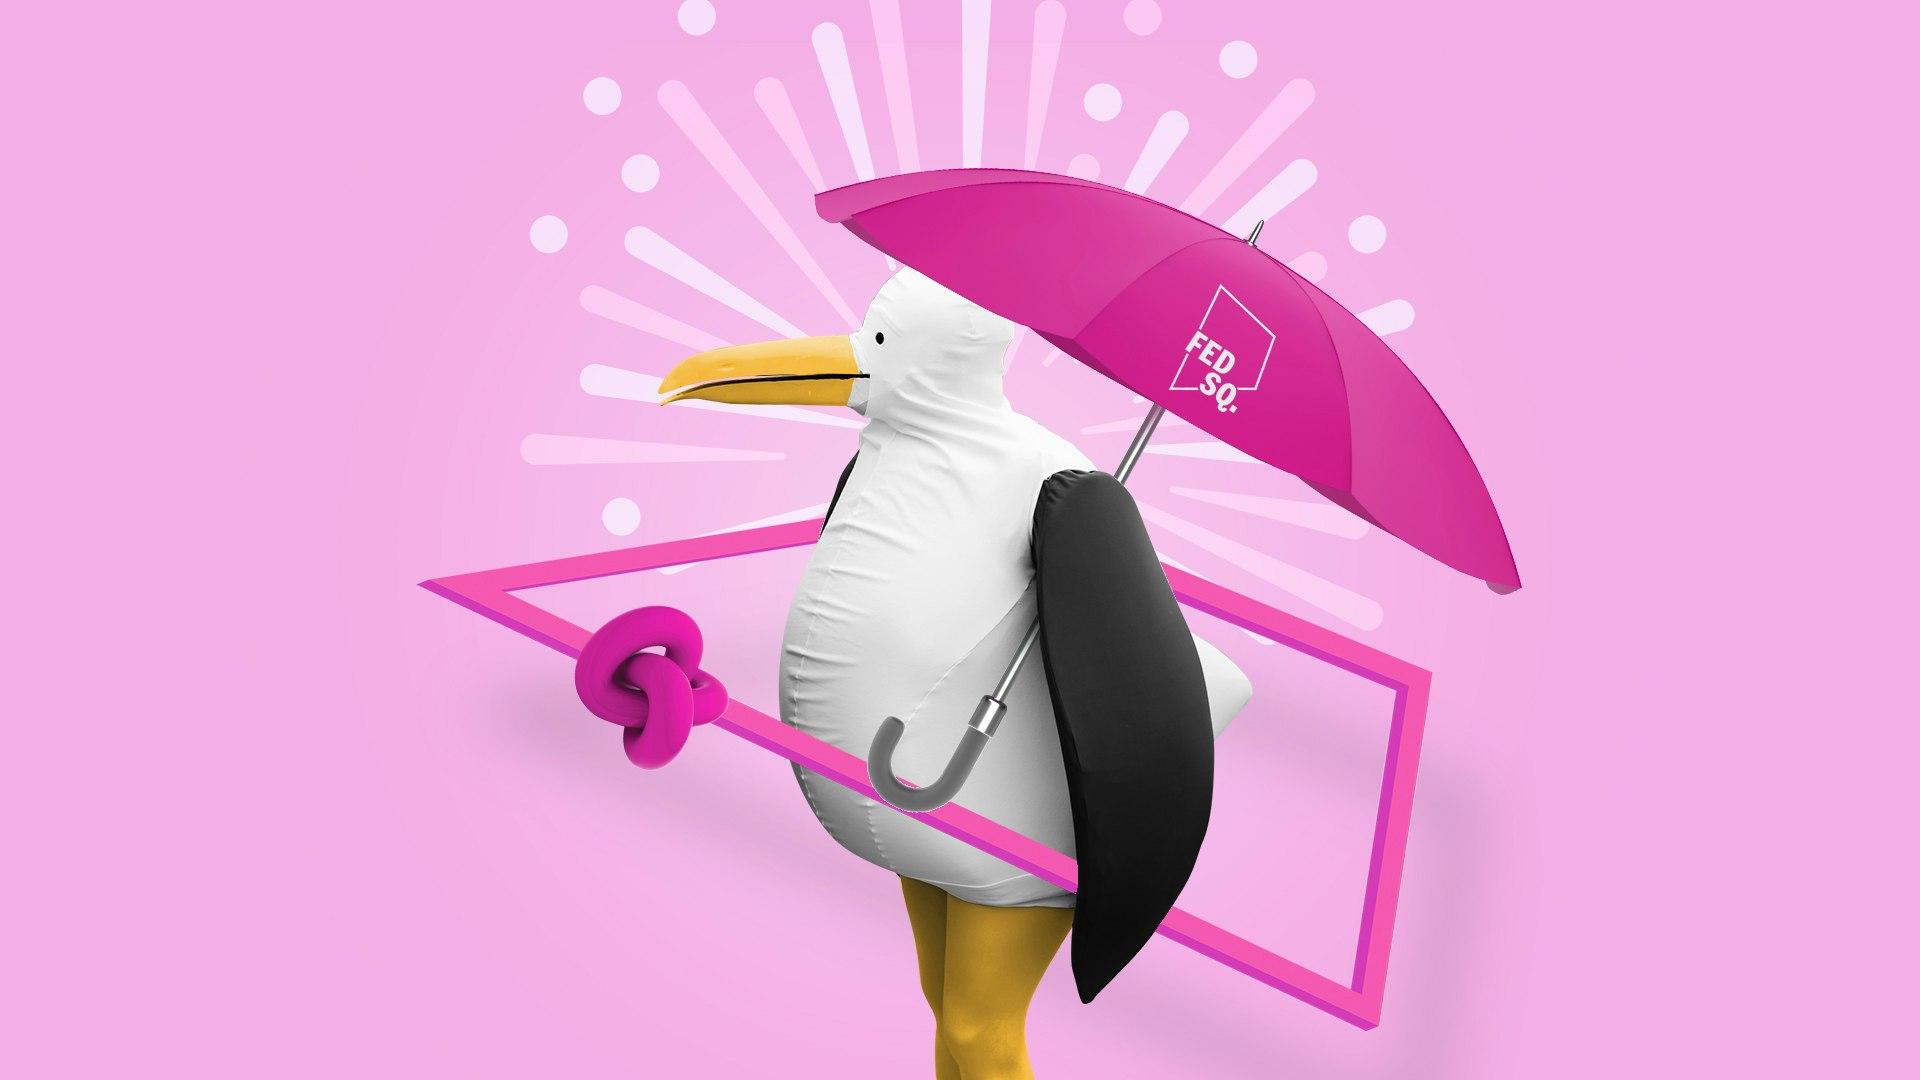 French seagull with umbrella